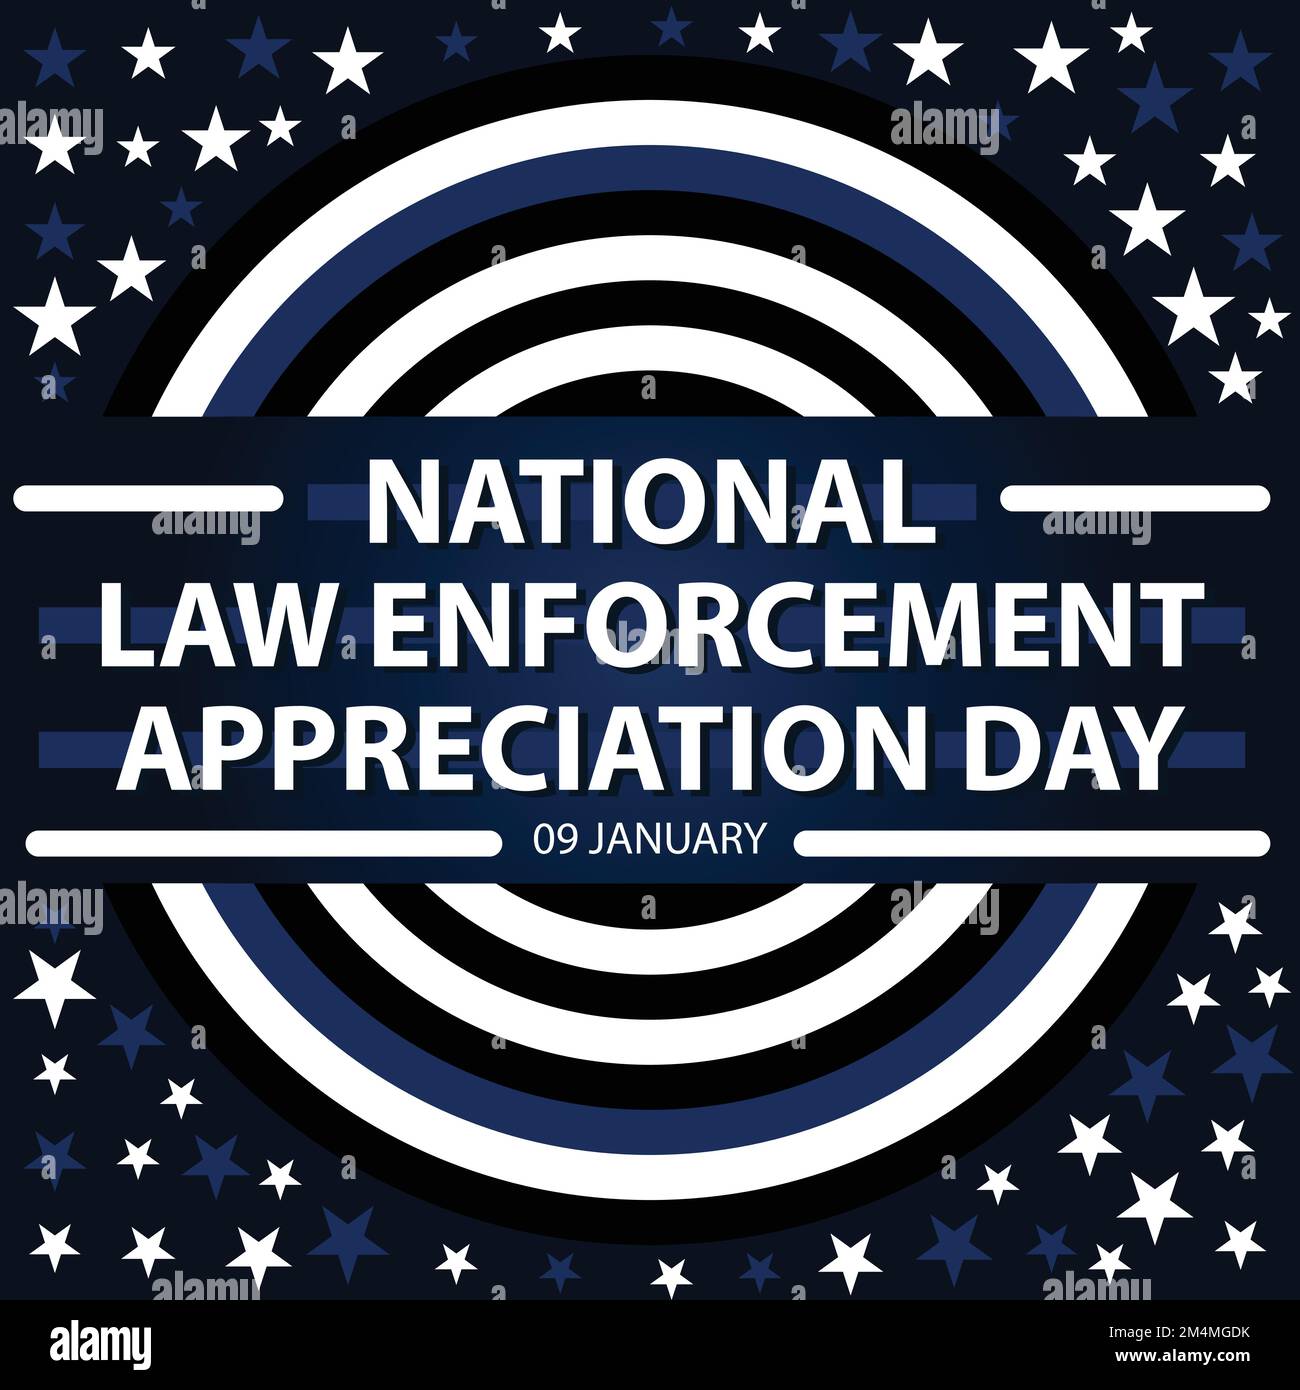 United States National Law Enforcement Day Banner Vector Design With Stars Stripes And Blue White Black Colors National Law Enforcement Day 2M4MGDK 